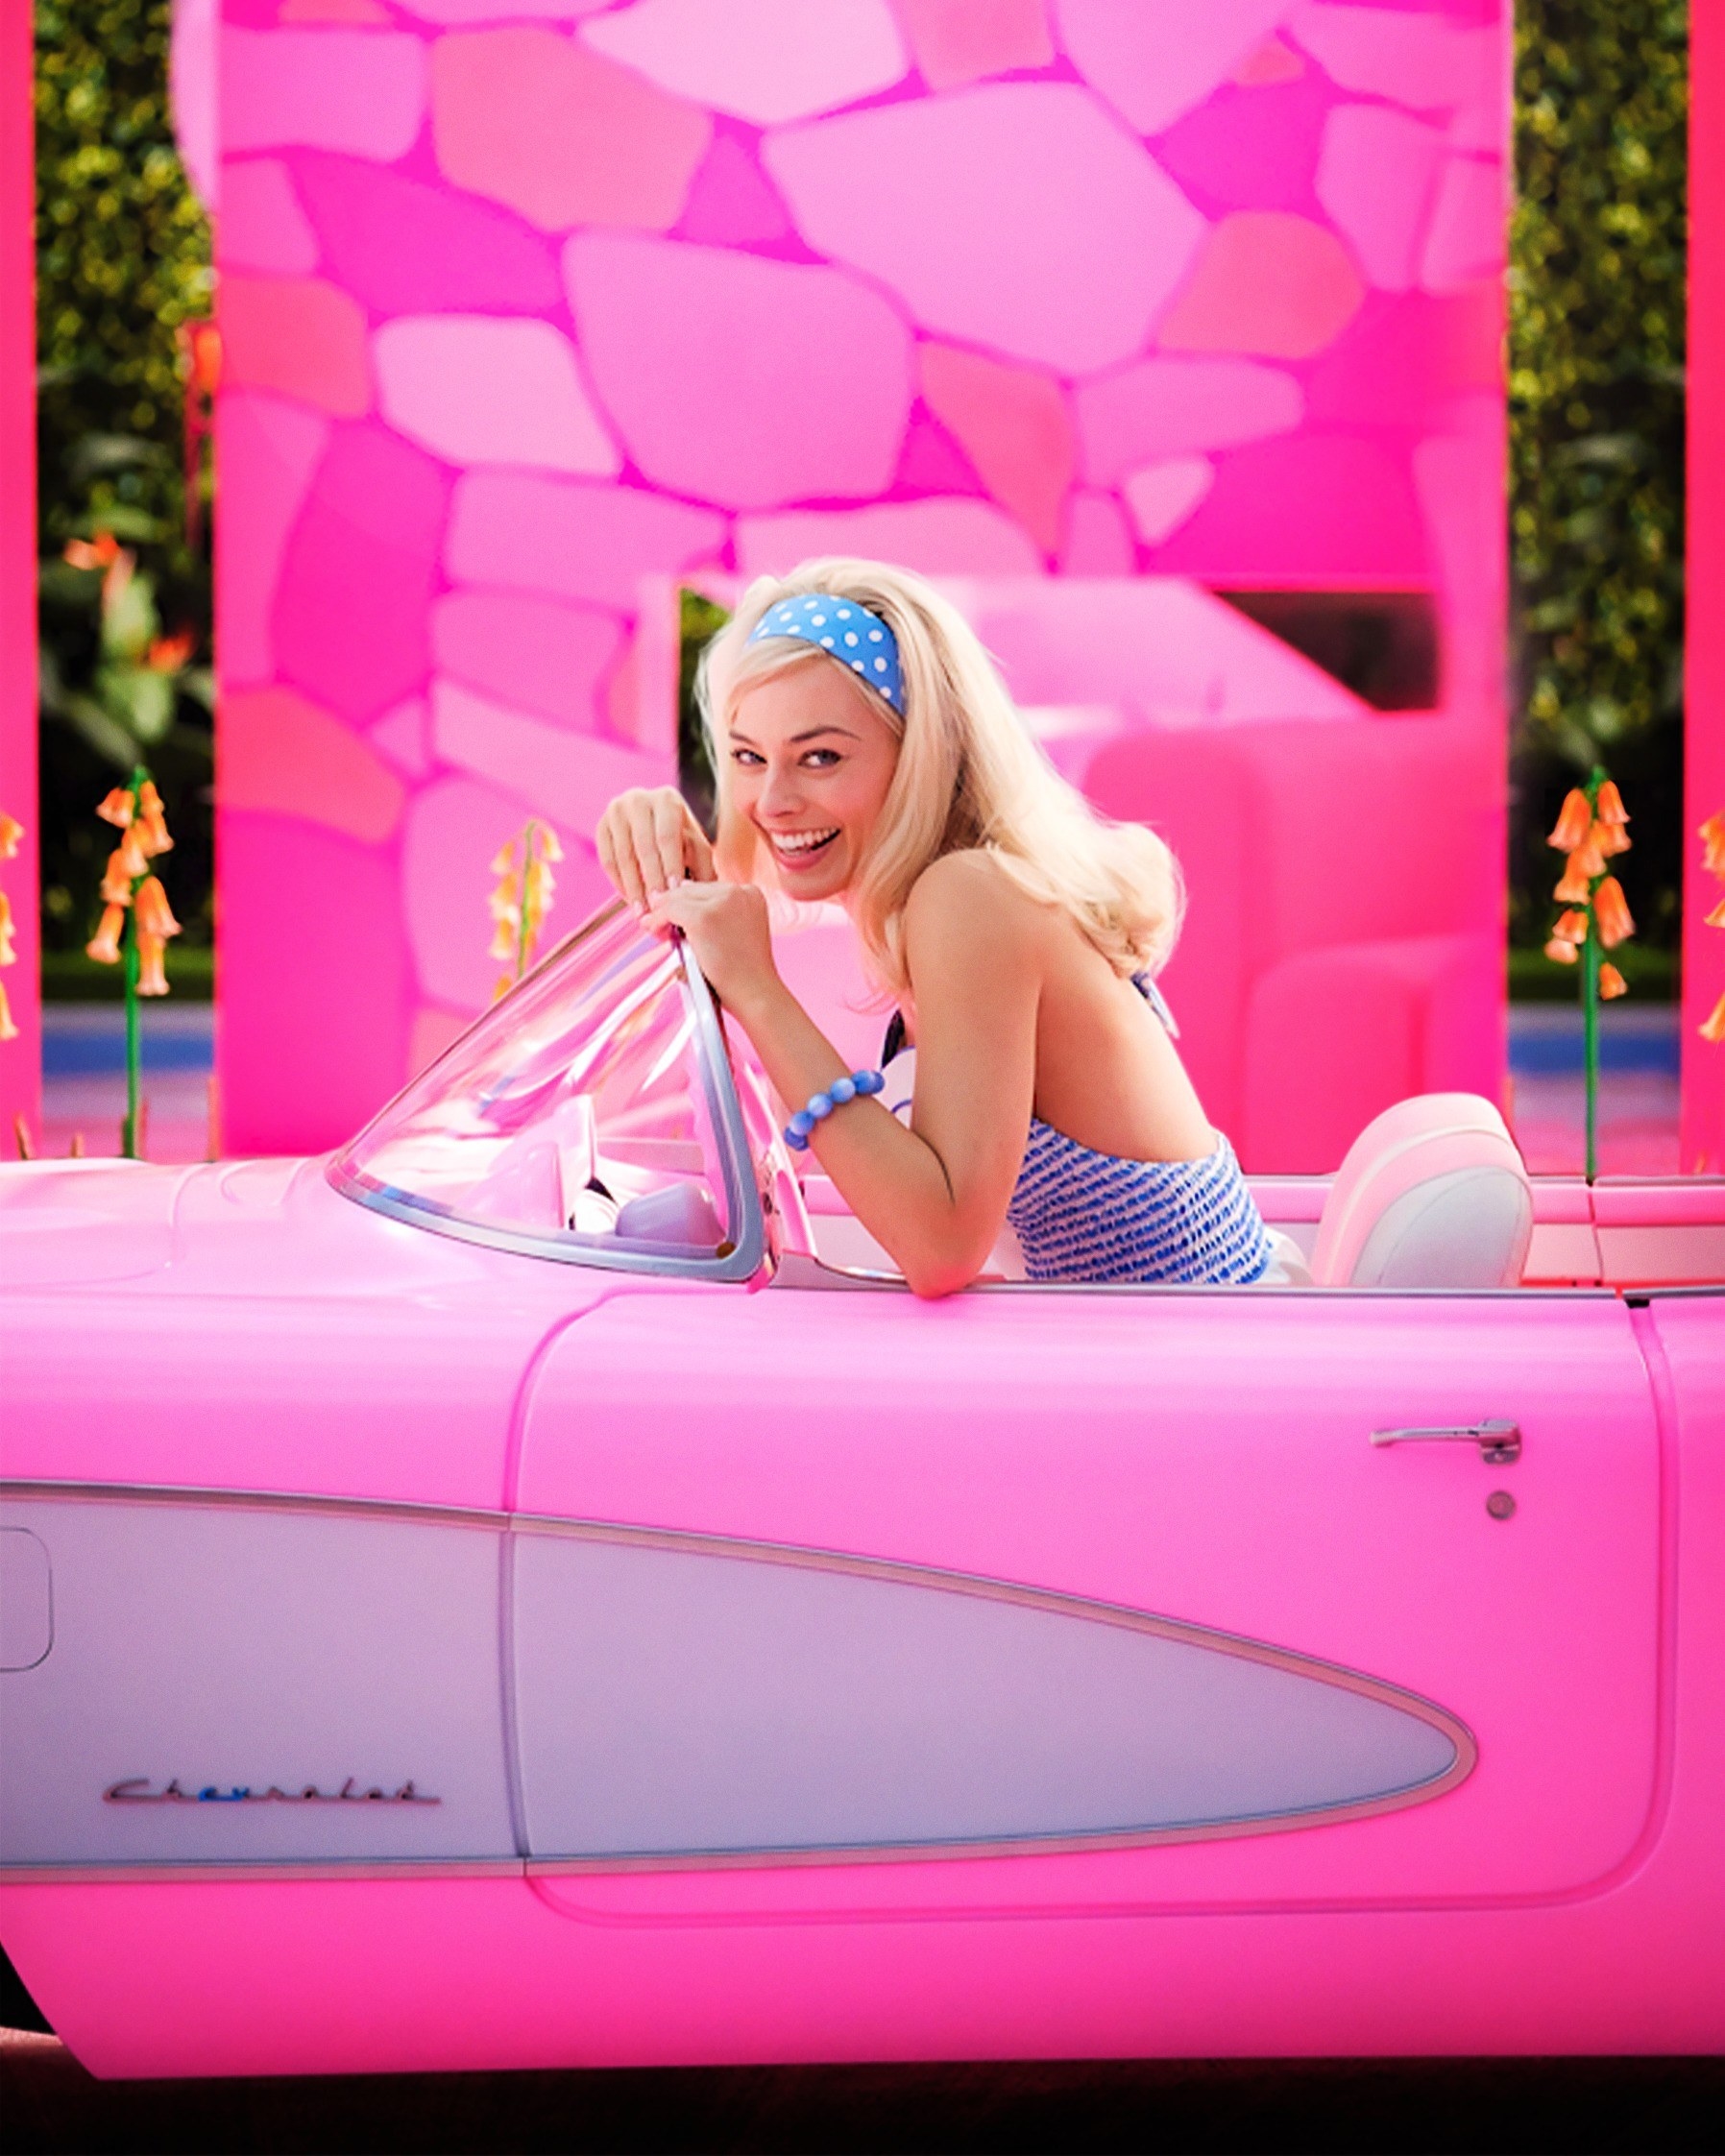 A woman sits in a pink car